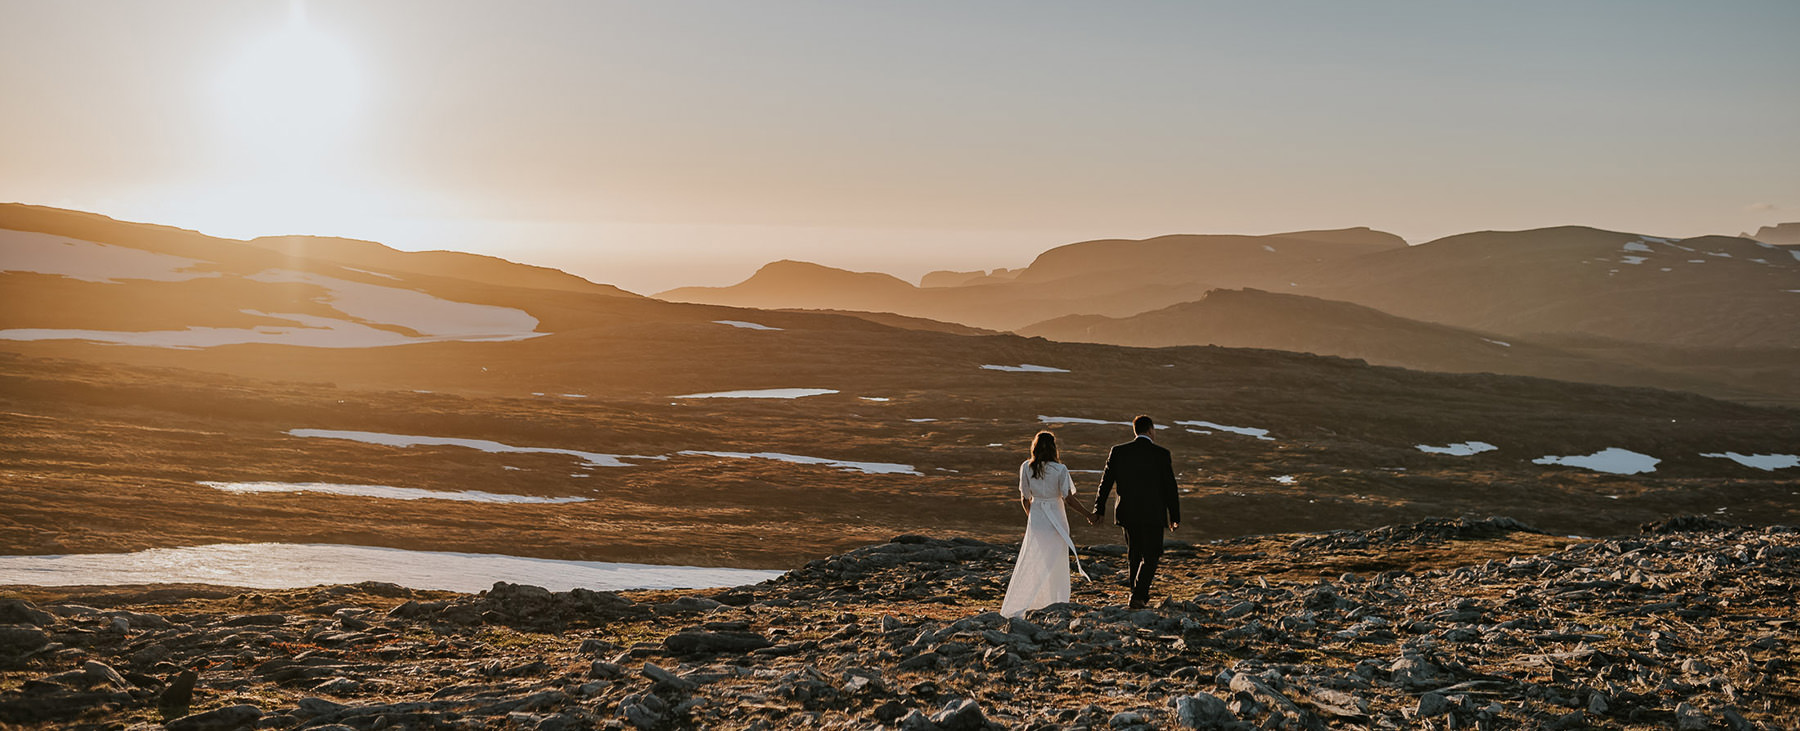 Elopement in Norway in the mountains - elopement timeline and packages - photographer TS Foto Design-1